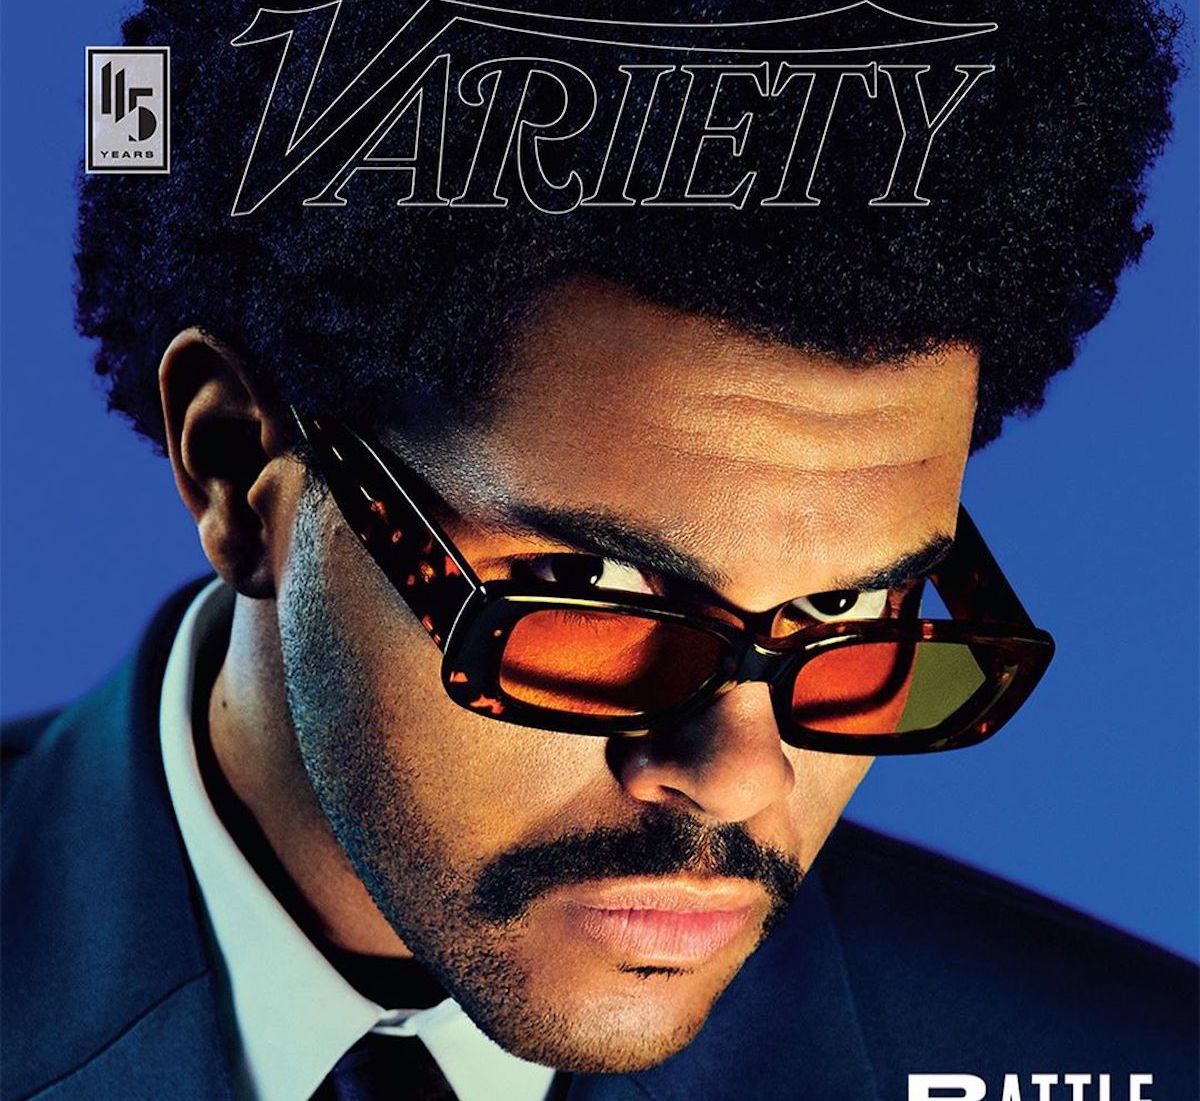 SPOTTED: The Weeknd Covers Variety Magazine in Balenciaga